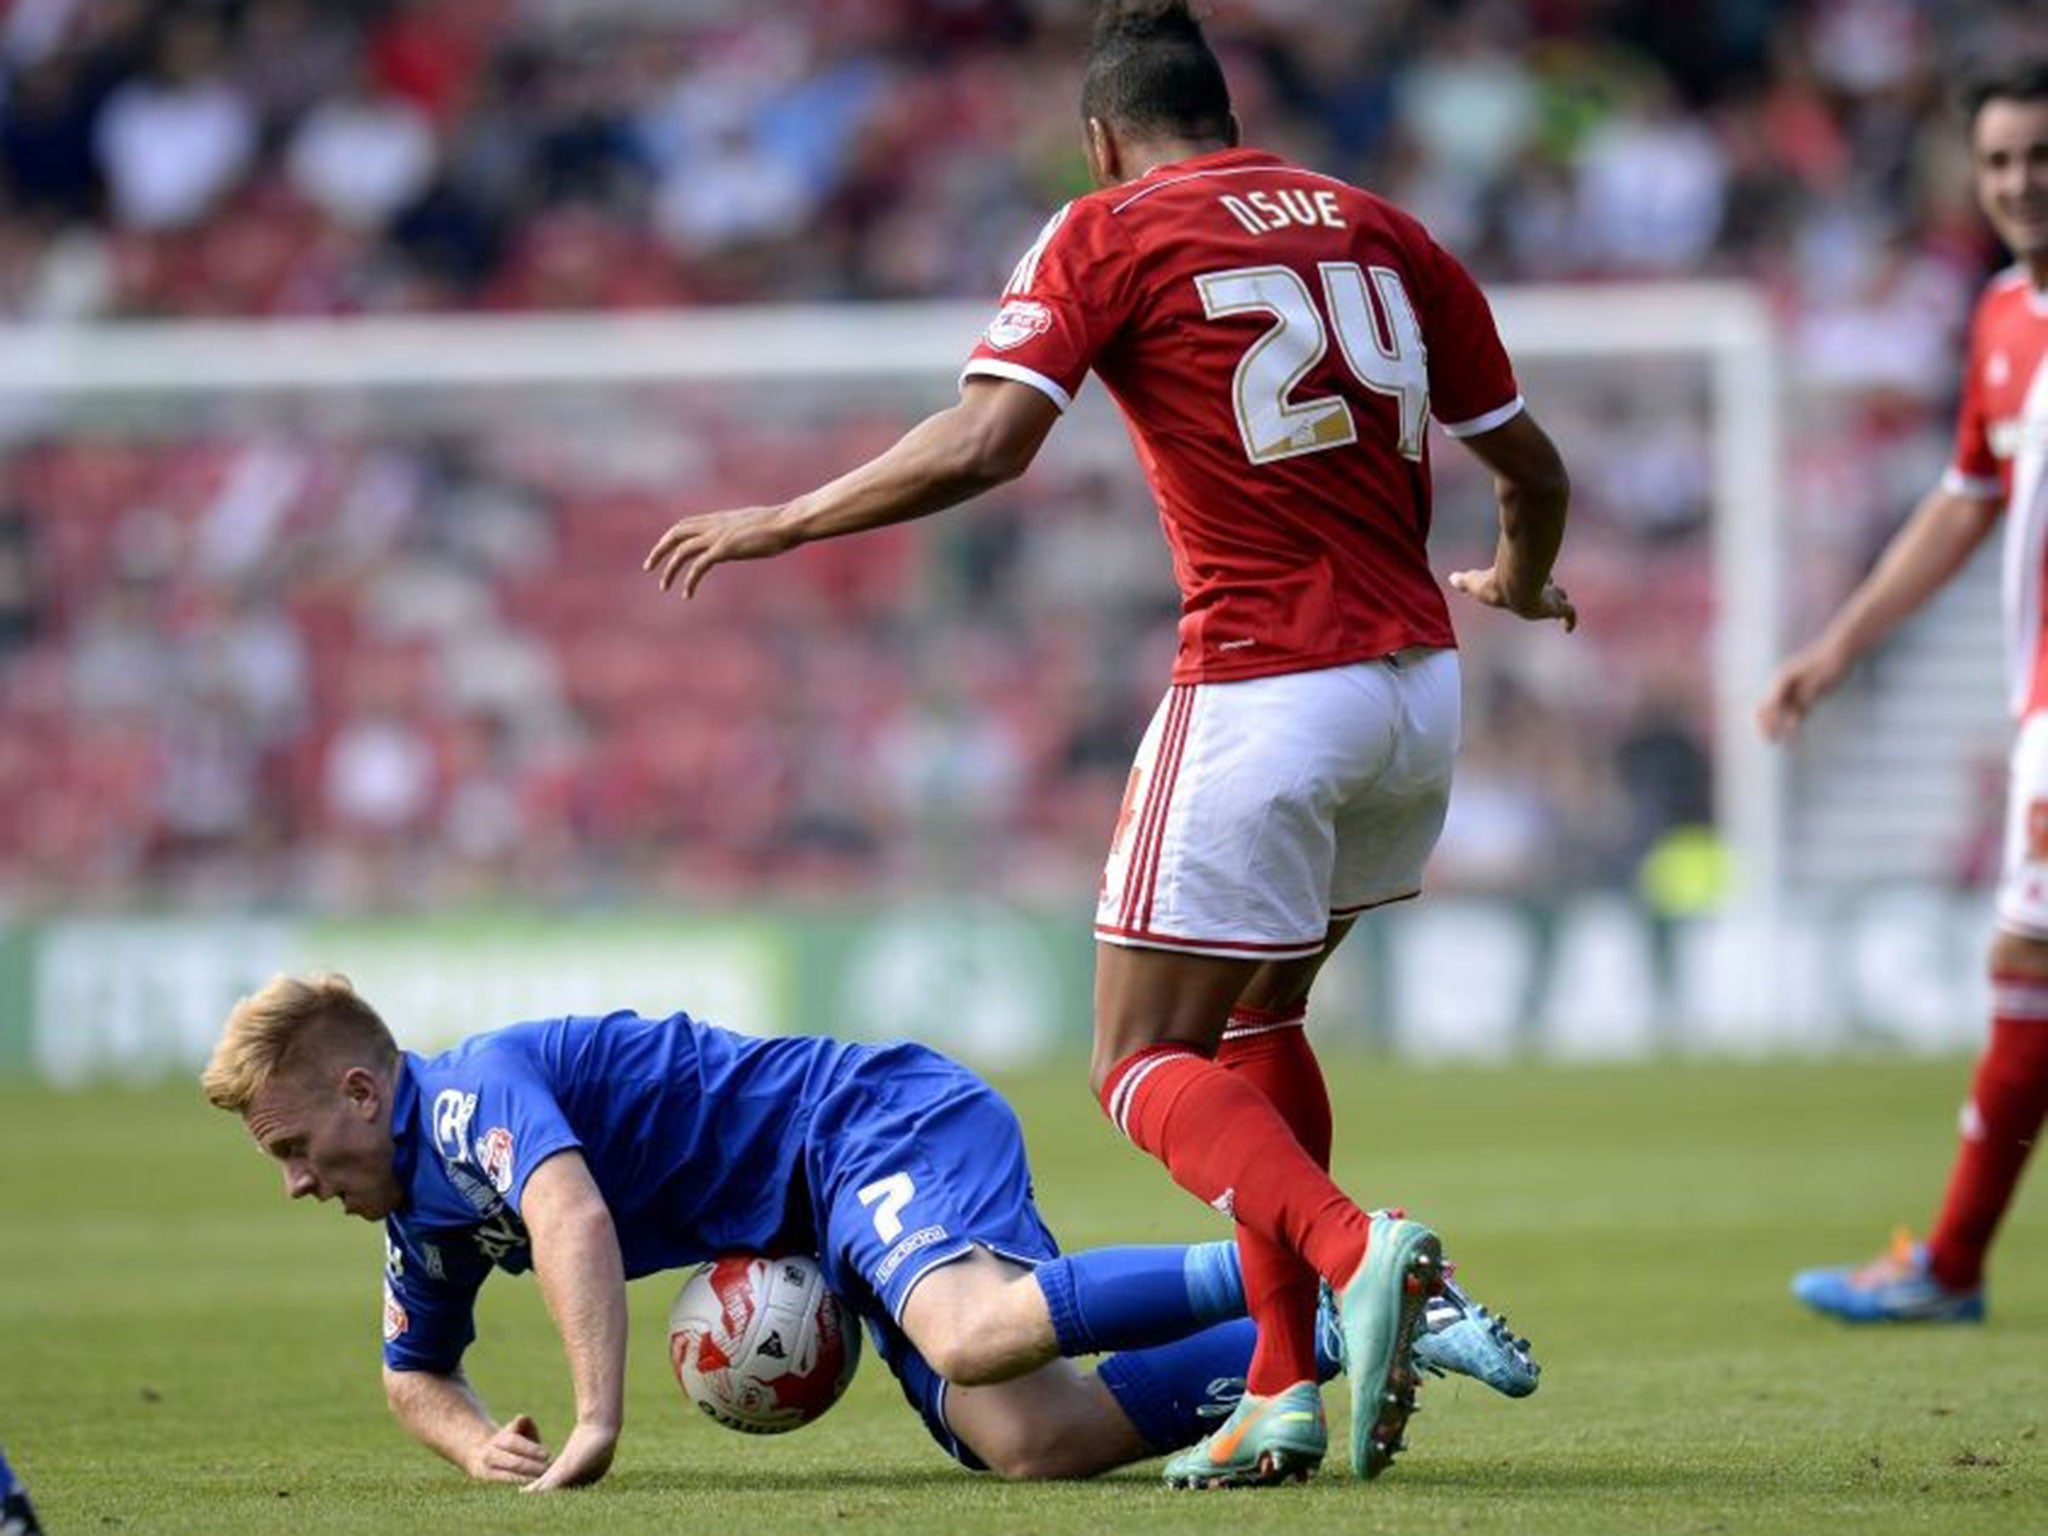 Birmingham's Mark Duffy is tripped by Middlesbrough's Emilio Nsue